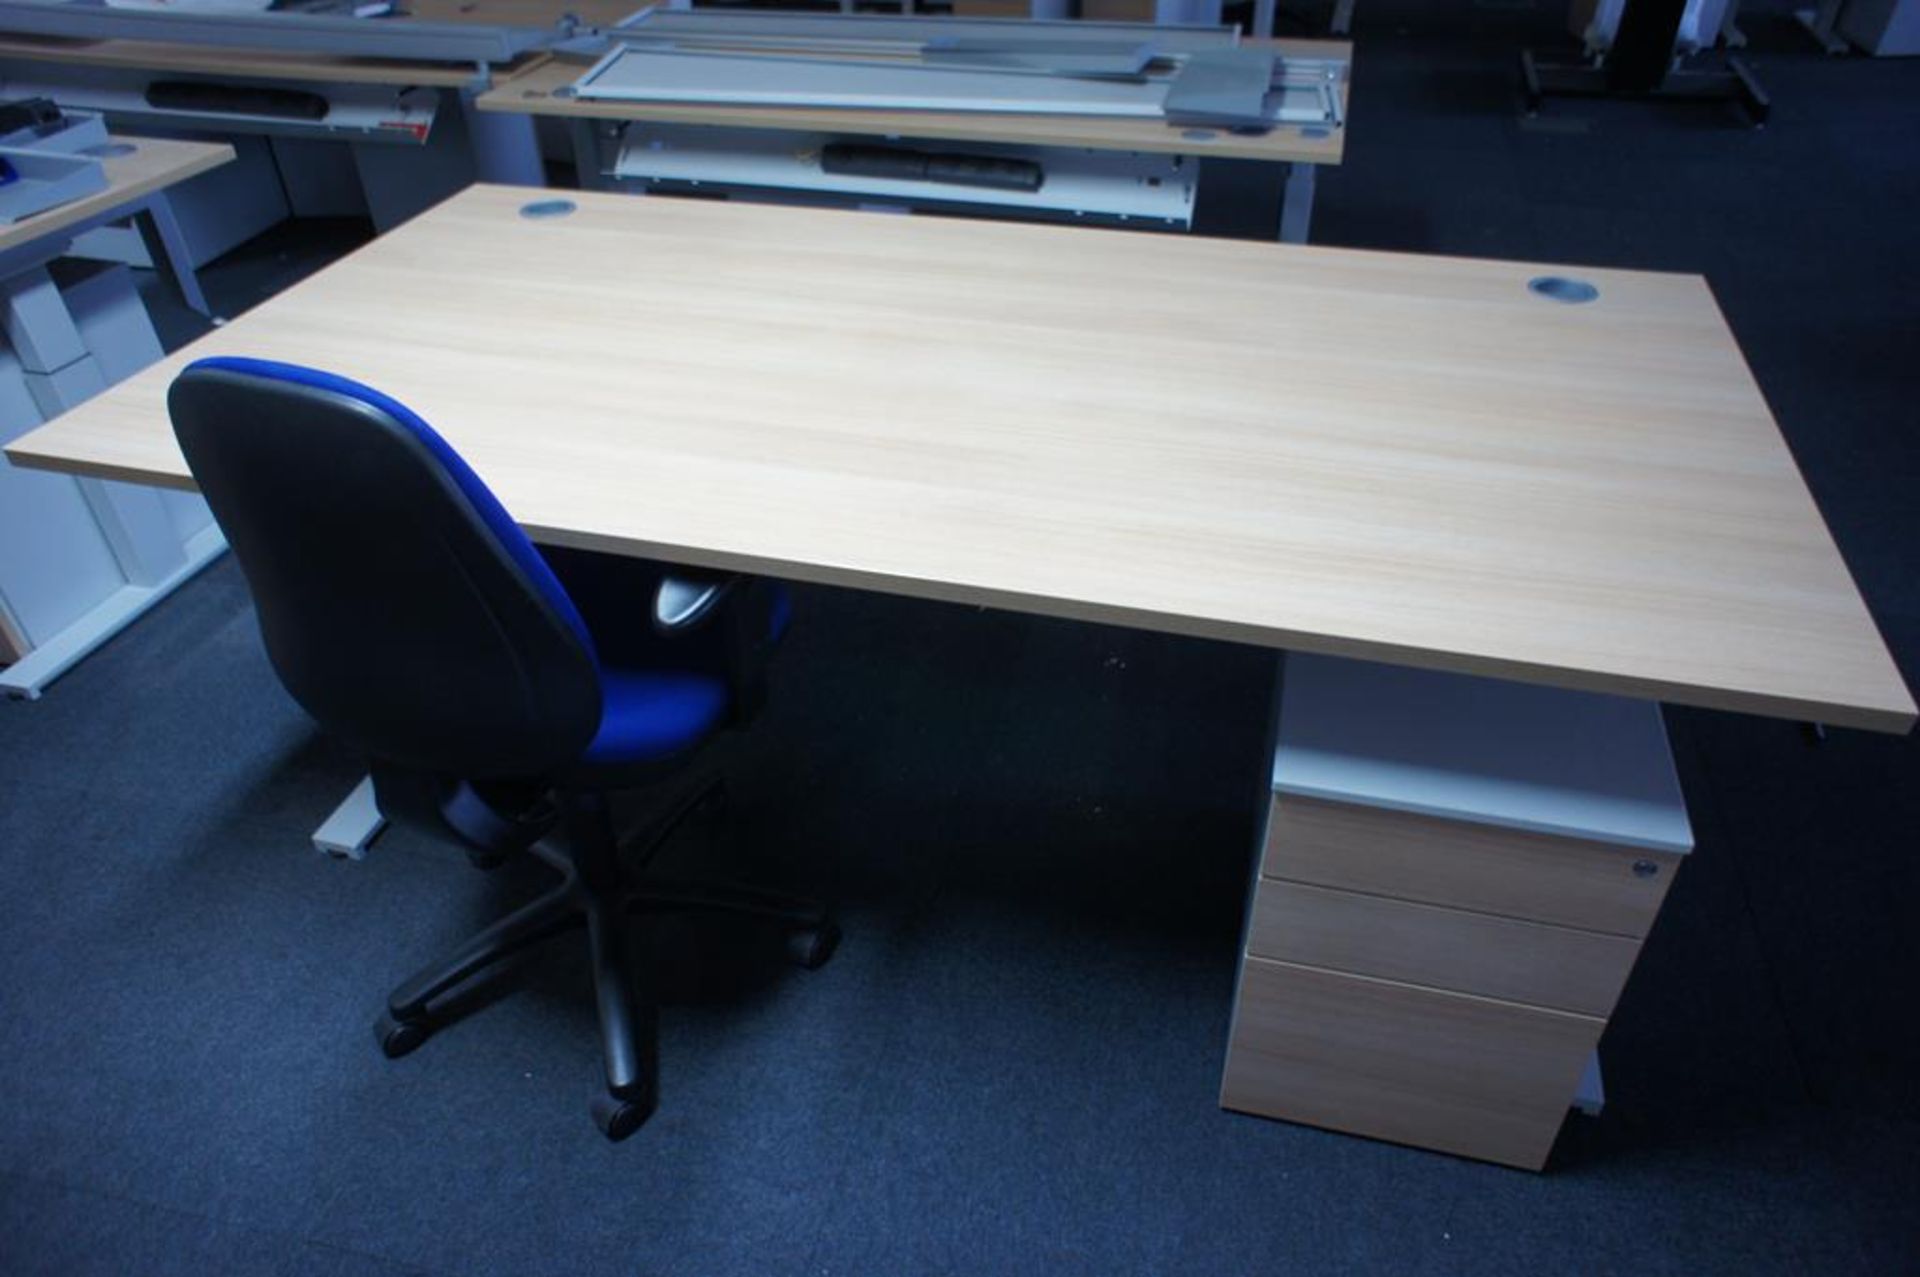 * Oak Effect Compiler Desk 2000 x 1000 with Rise & Fall adjustment with matching pedestal &